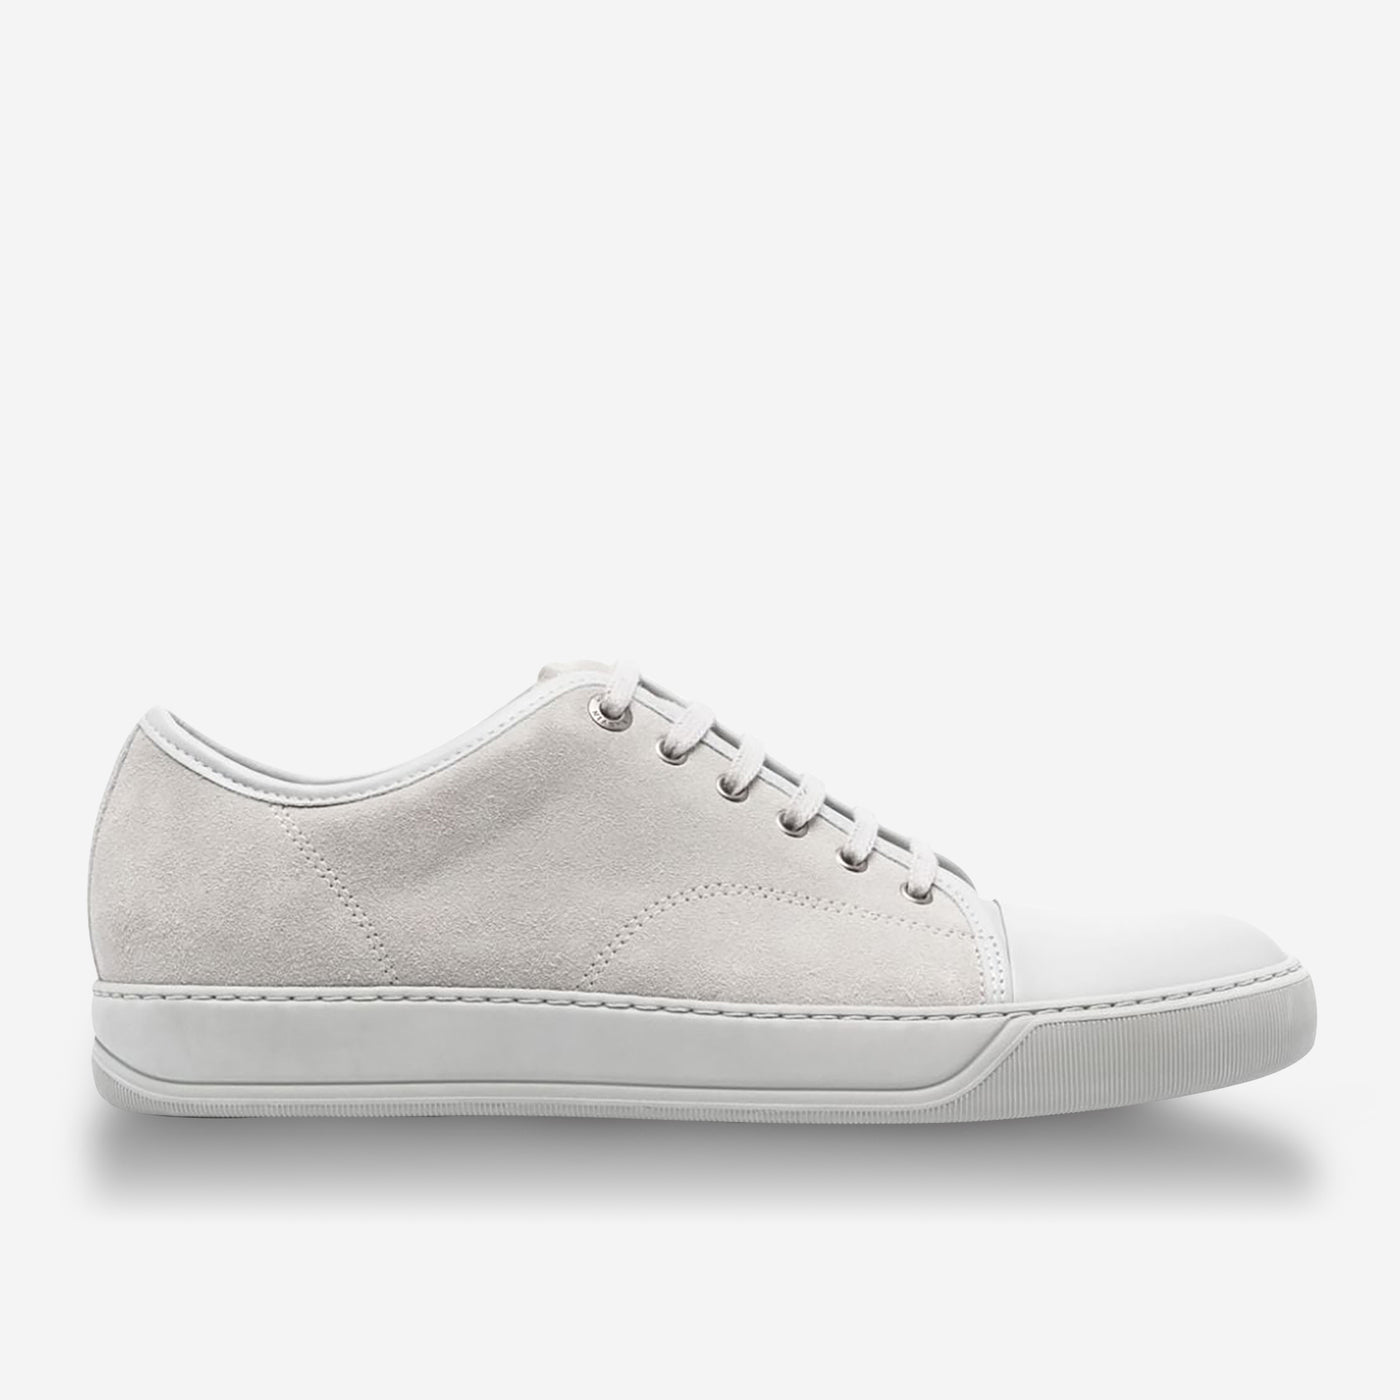 Lanvin DBB1 Leather And Suede Sneakers